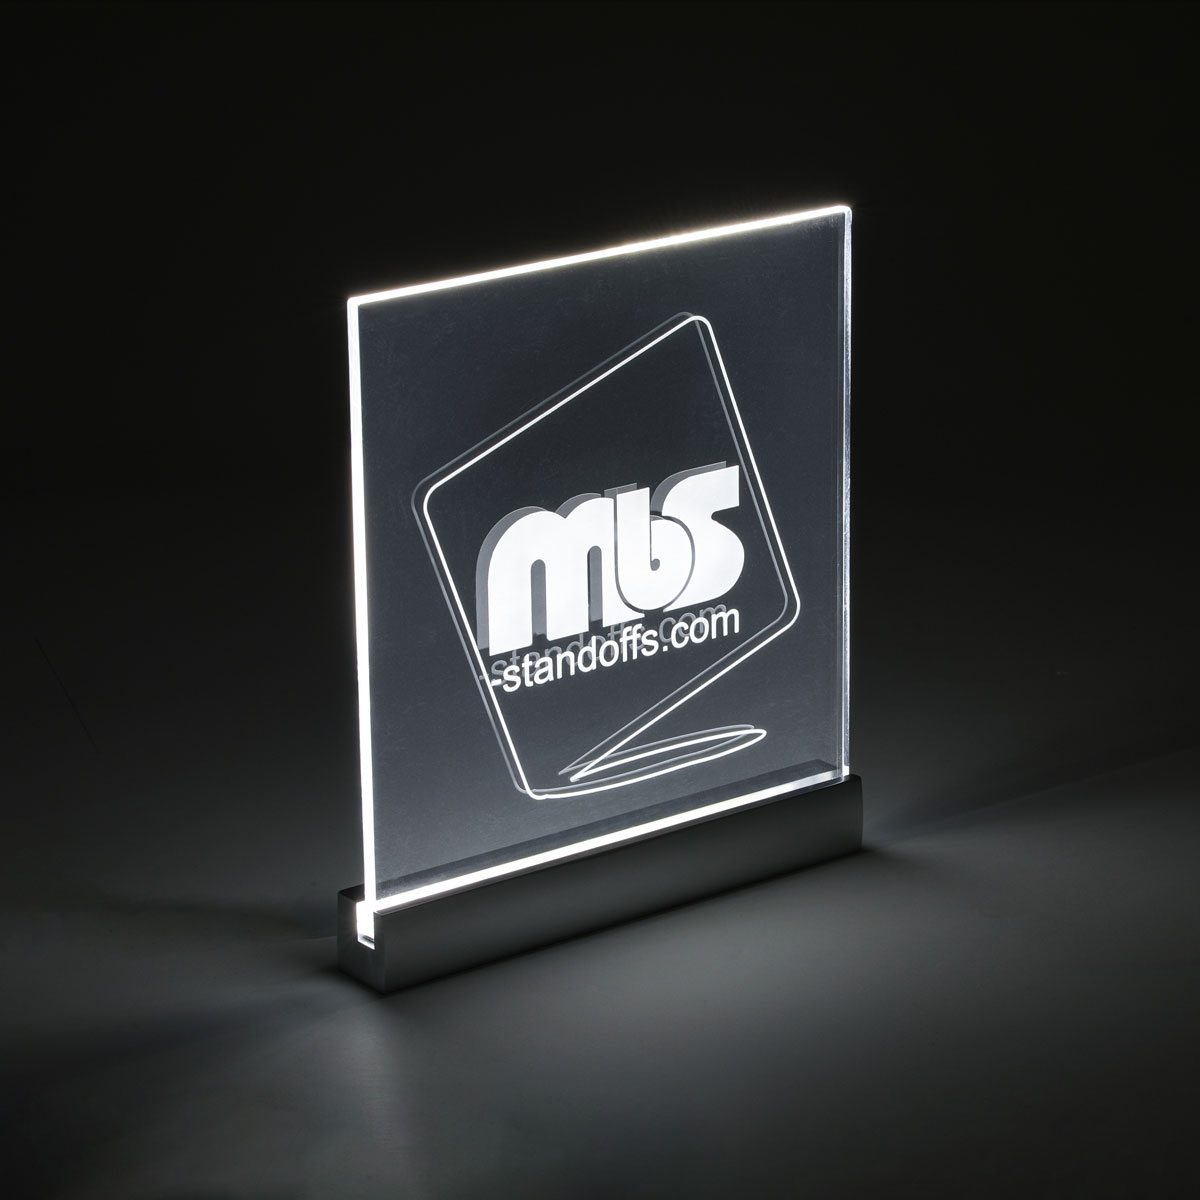 WHITE LED Sign Clamp in 7 1/16'' (180 mm) length X 1'' (25.4 mm) Silver satin aluminum finish.Mount Kit Supports Signs Up To 5/16'' Thick, Wall Mount, Low Voltage transformer included.